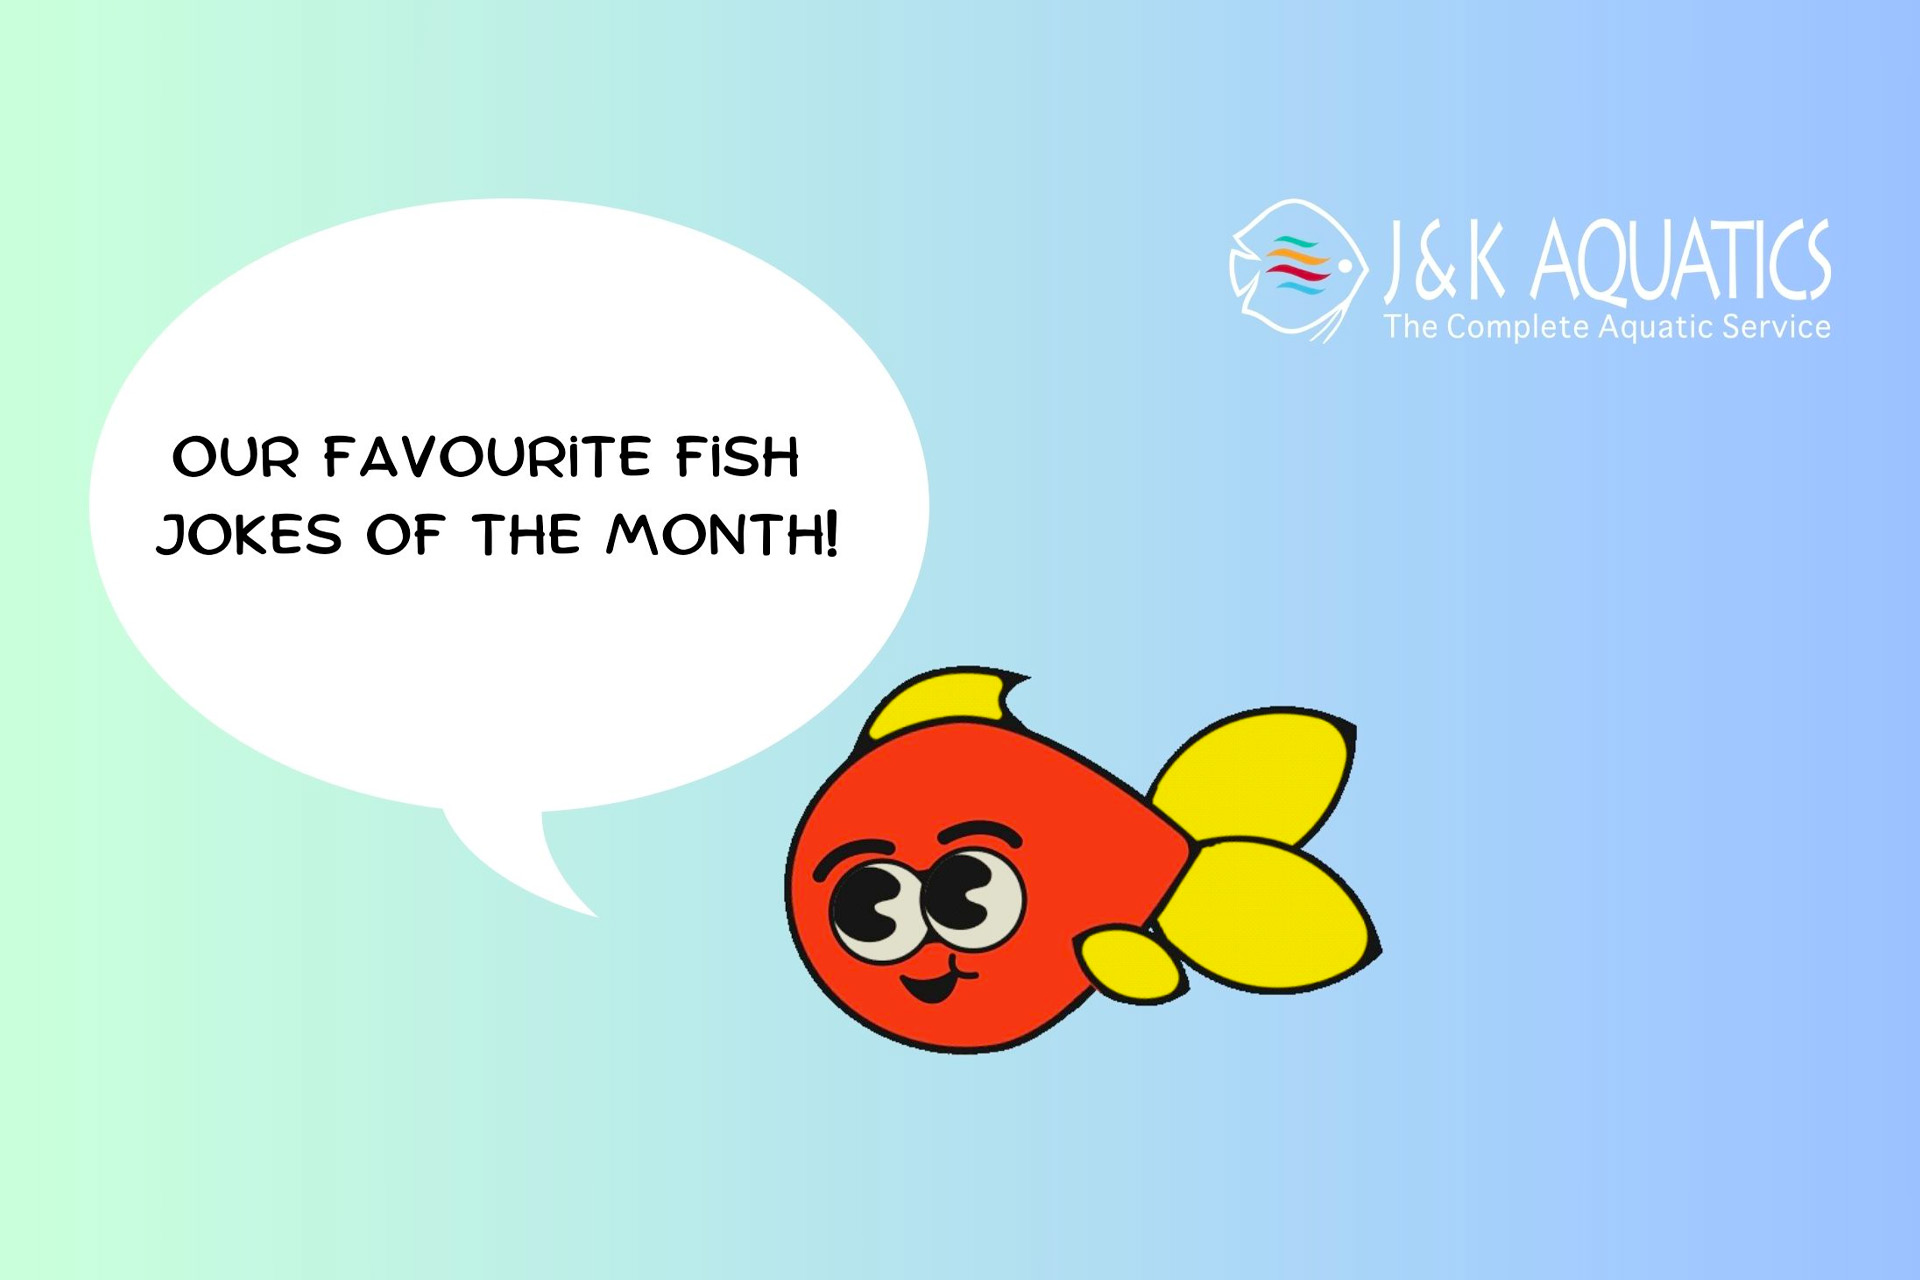 Our favourite fish jokes this month #2